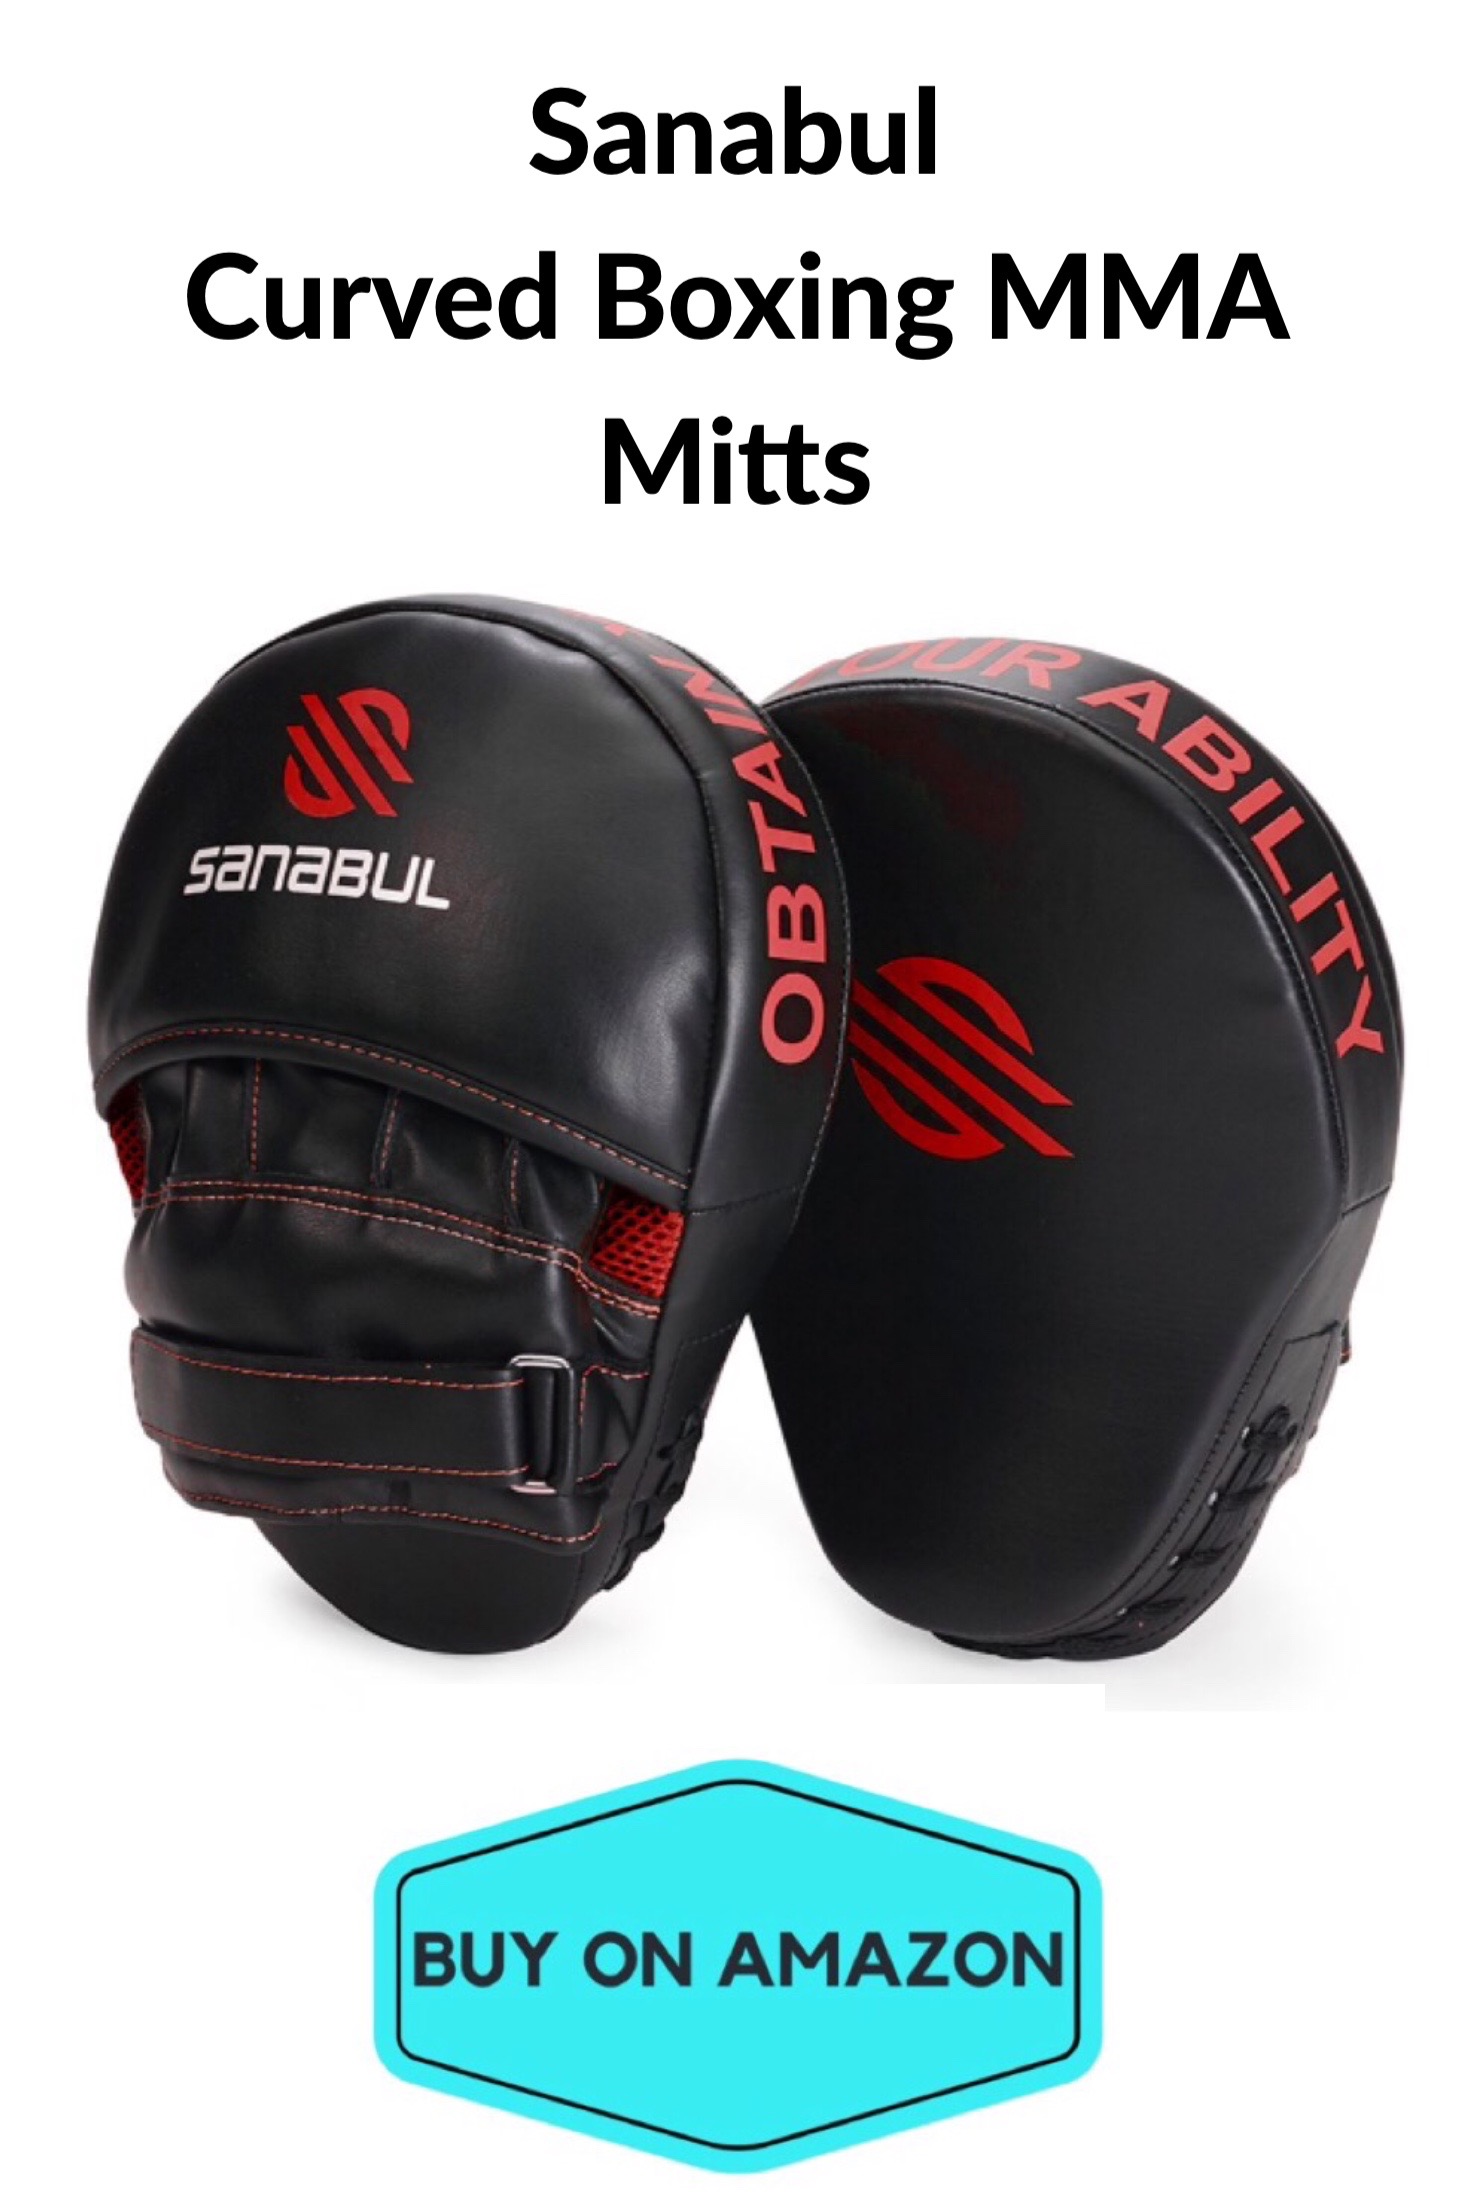 Sanabul Curved Boxing MMA Punching Mitts